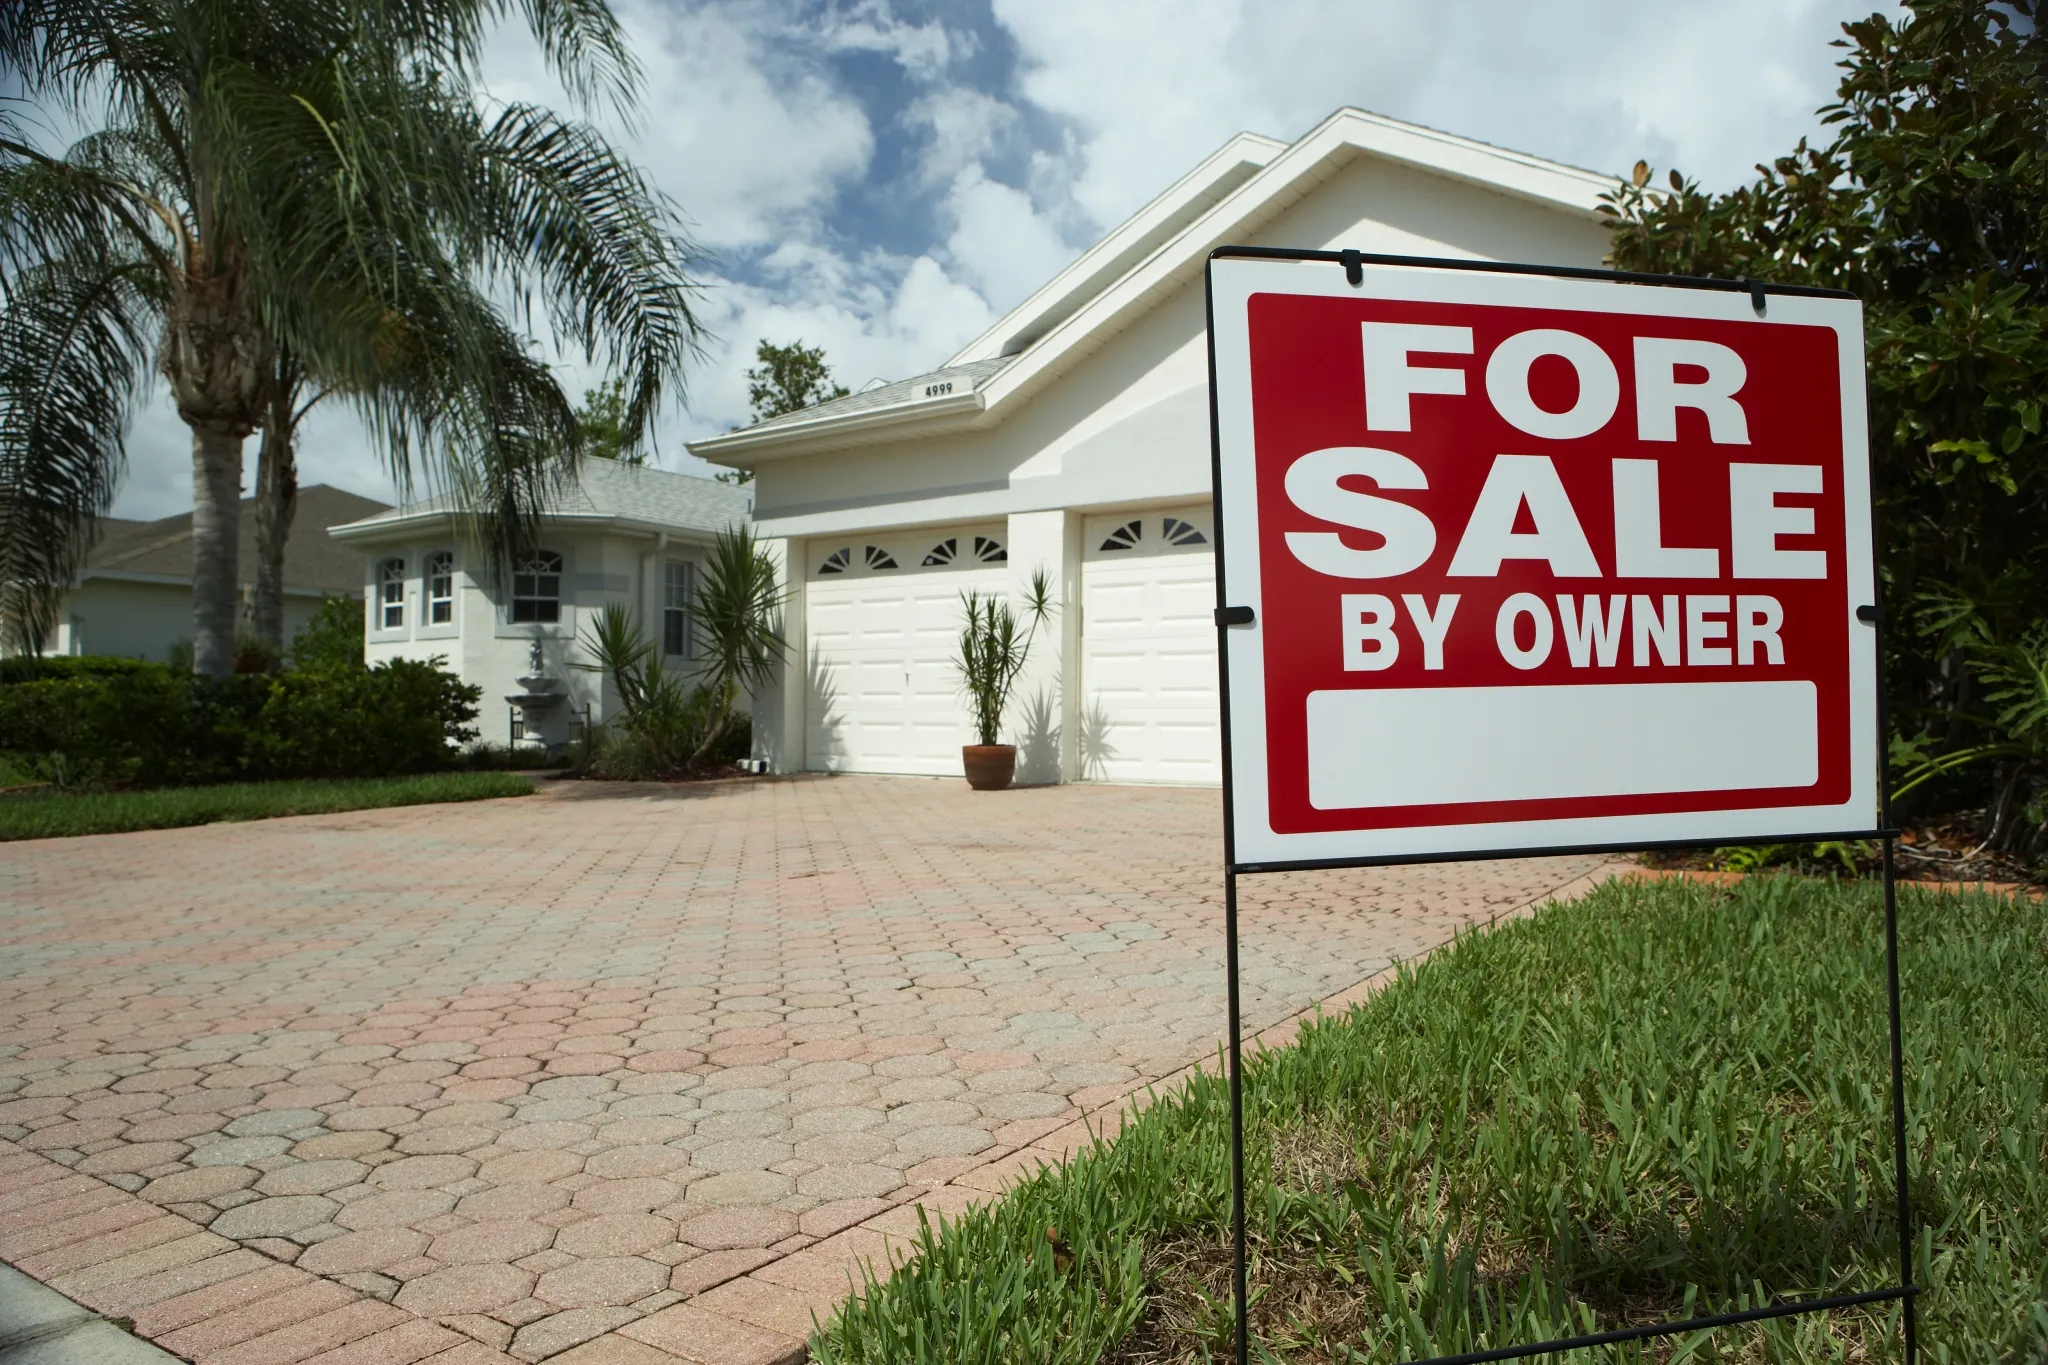 The Dangers of Selling Real Estate Without an Agent